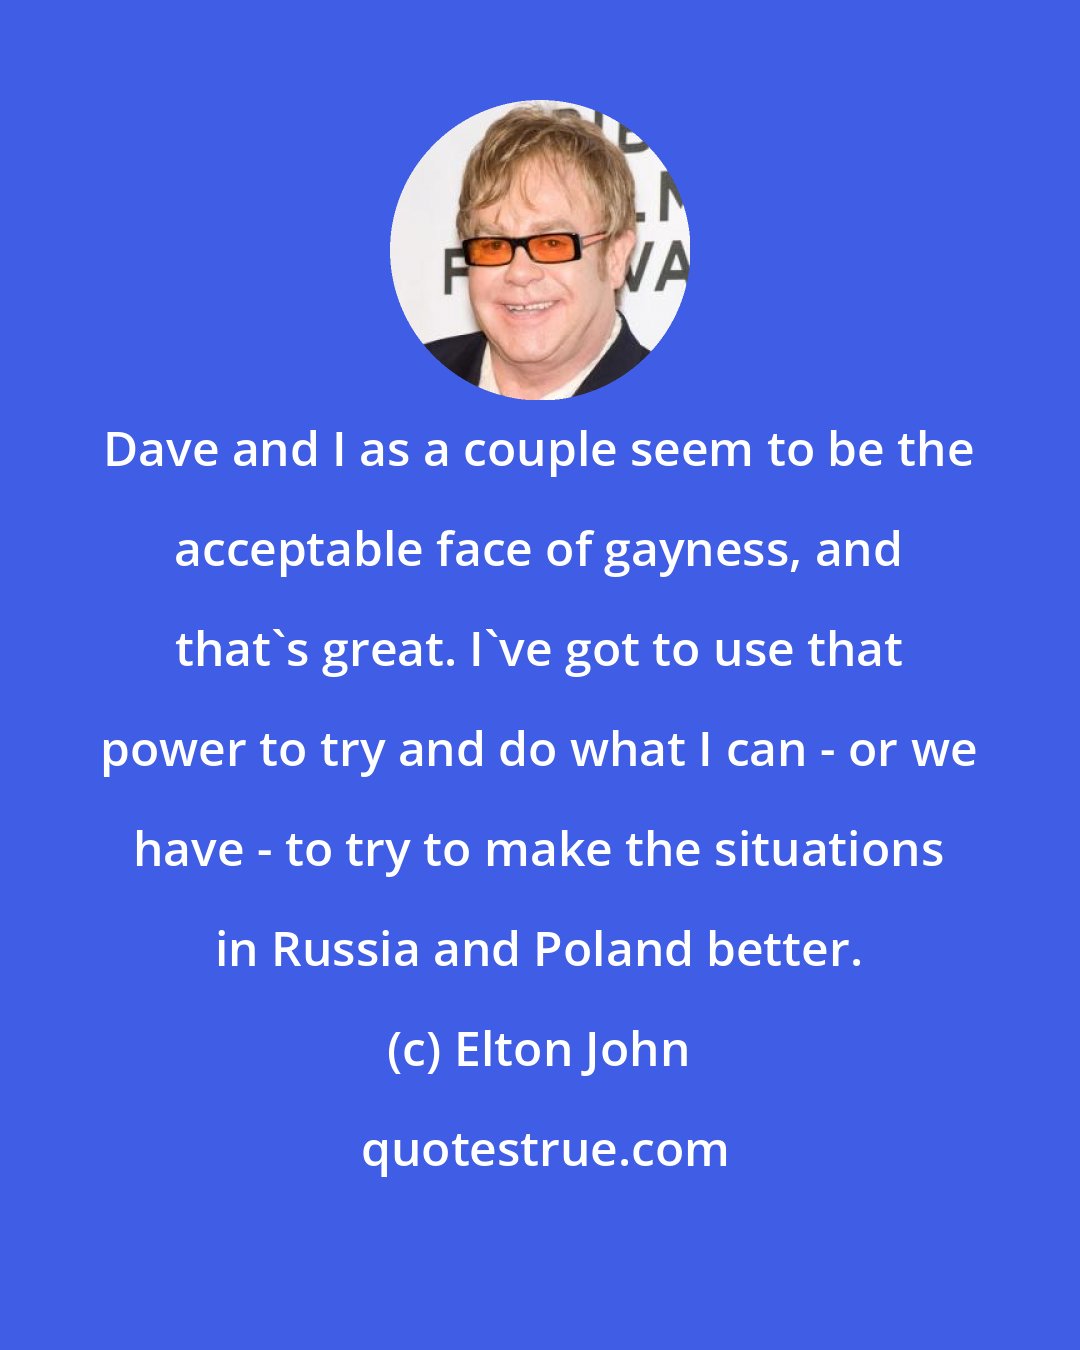 Elton John: Dave and I as a couple seem to be the acceptable face of gayness, and that's great. I've got to use that power to try and do what I can - or we have - to try to make the situations in Russia and Poland better.